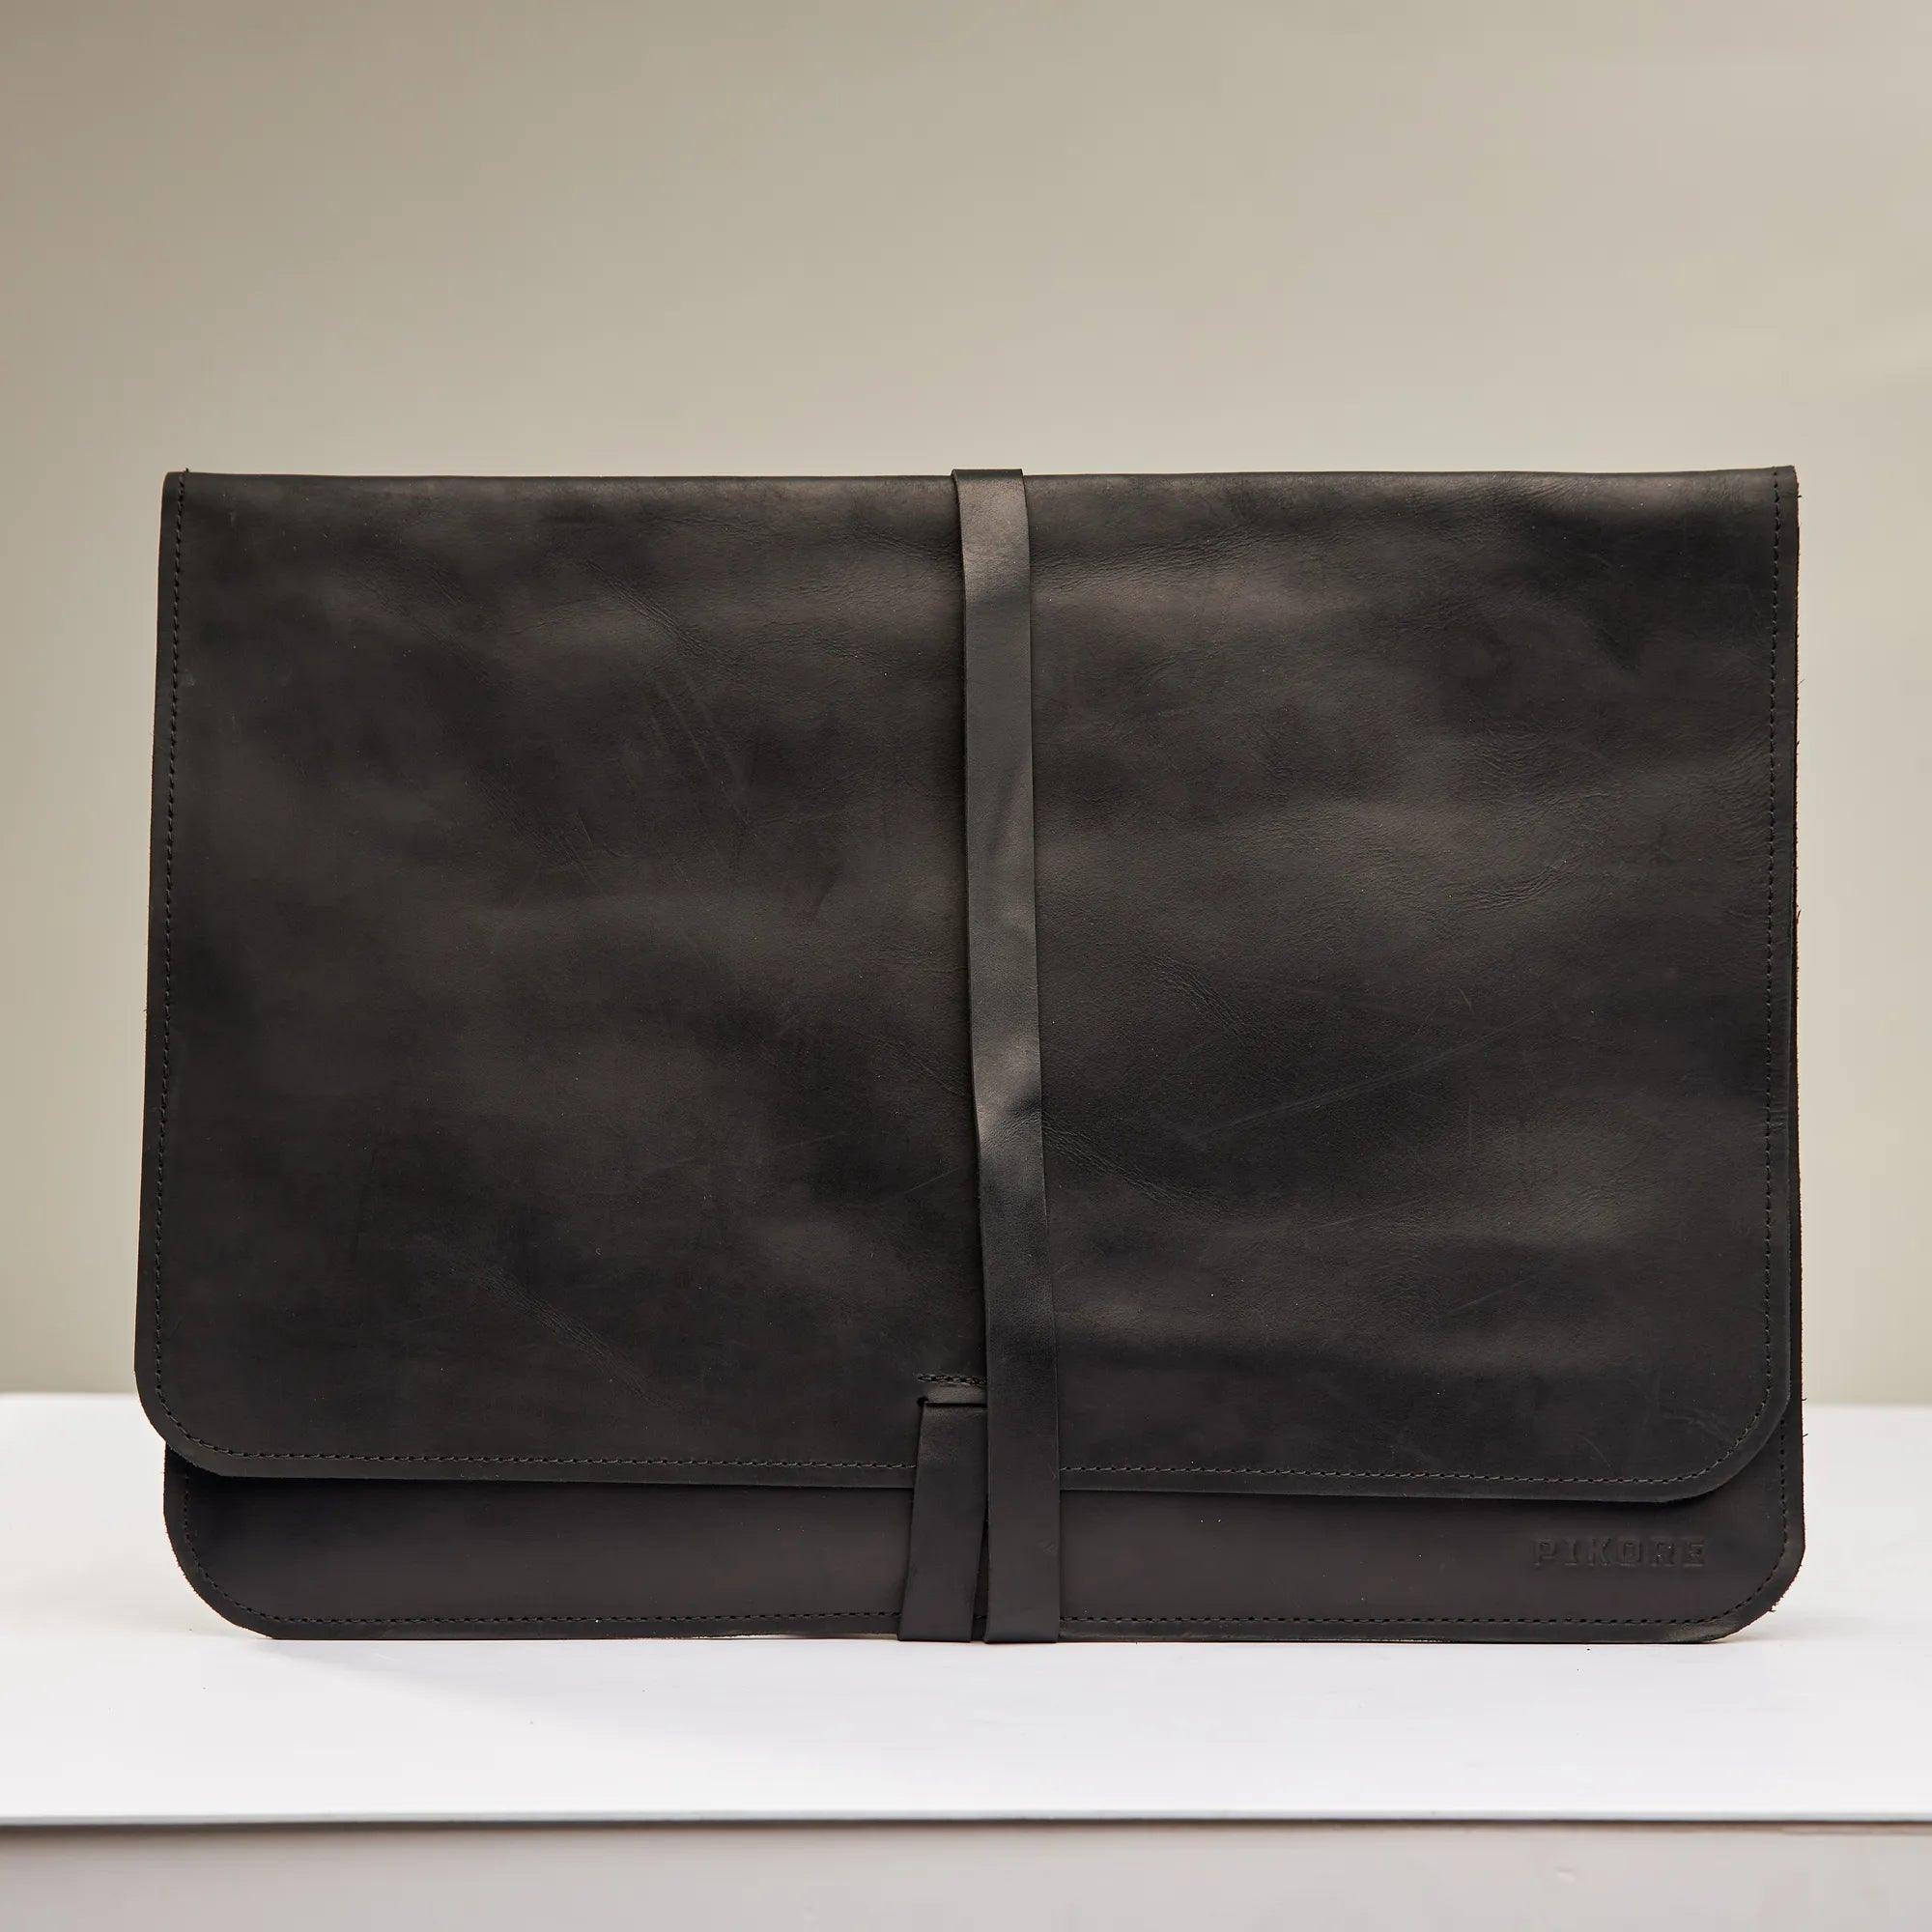 Leather MacBook Sleeve with Tie Closure - Pikore